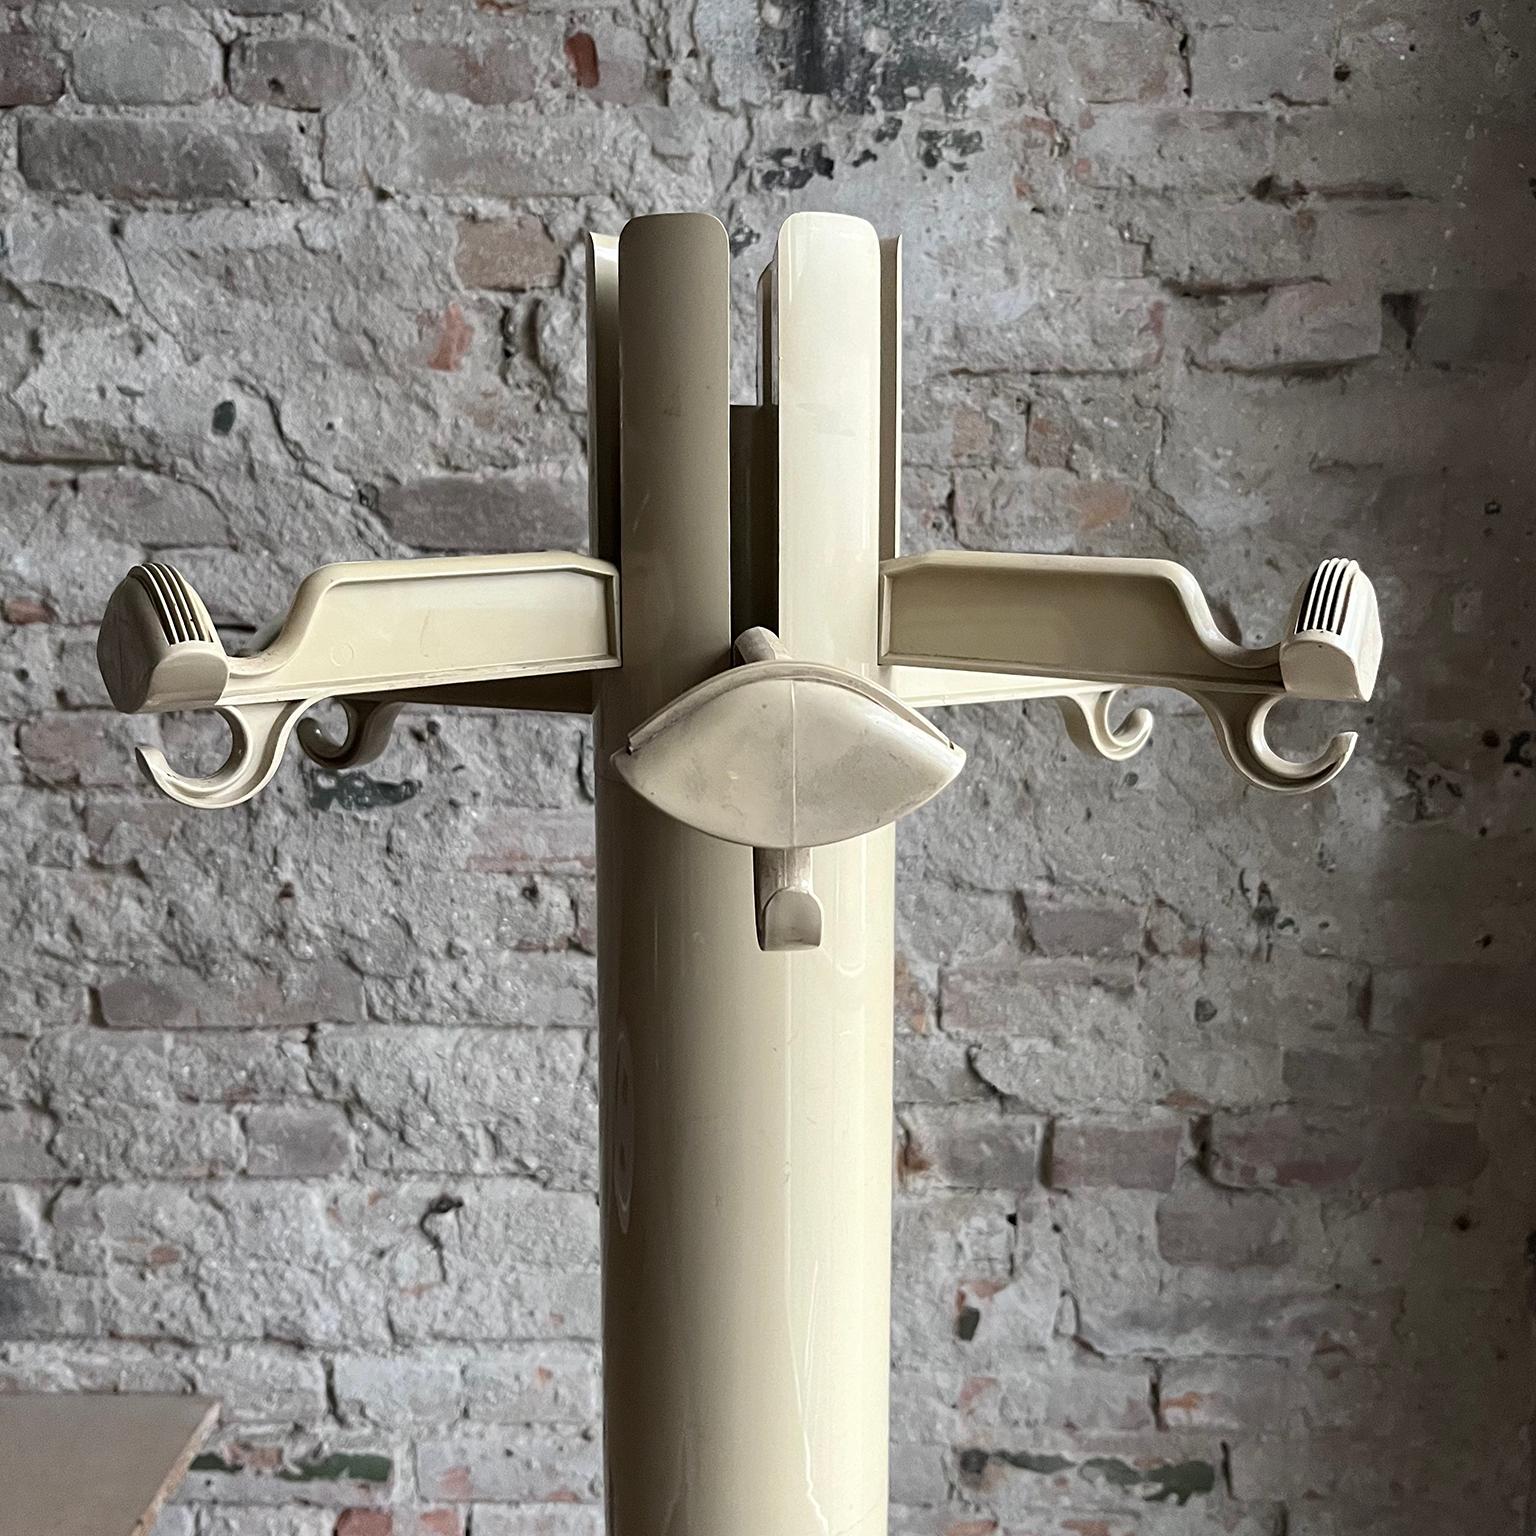 Planta iconic coat rack.

The coat rack hooks, can be set in or out and have multiple functions for hanging coats or clothes in different ways and have an umbrella stand. The coat rack show traces of use like some scratches and spots. Due to